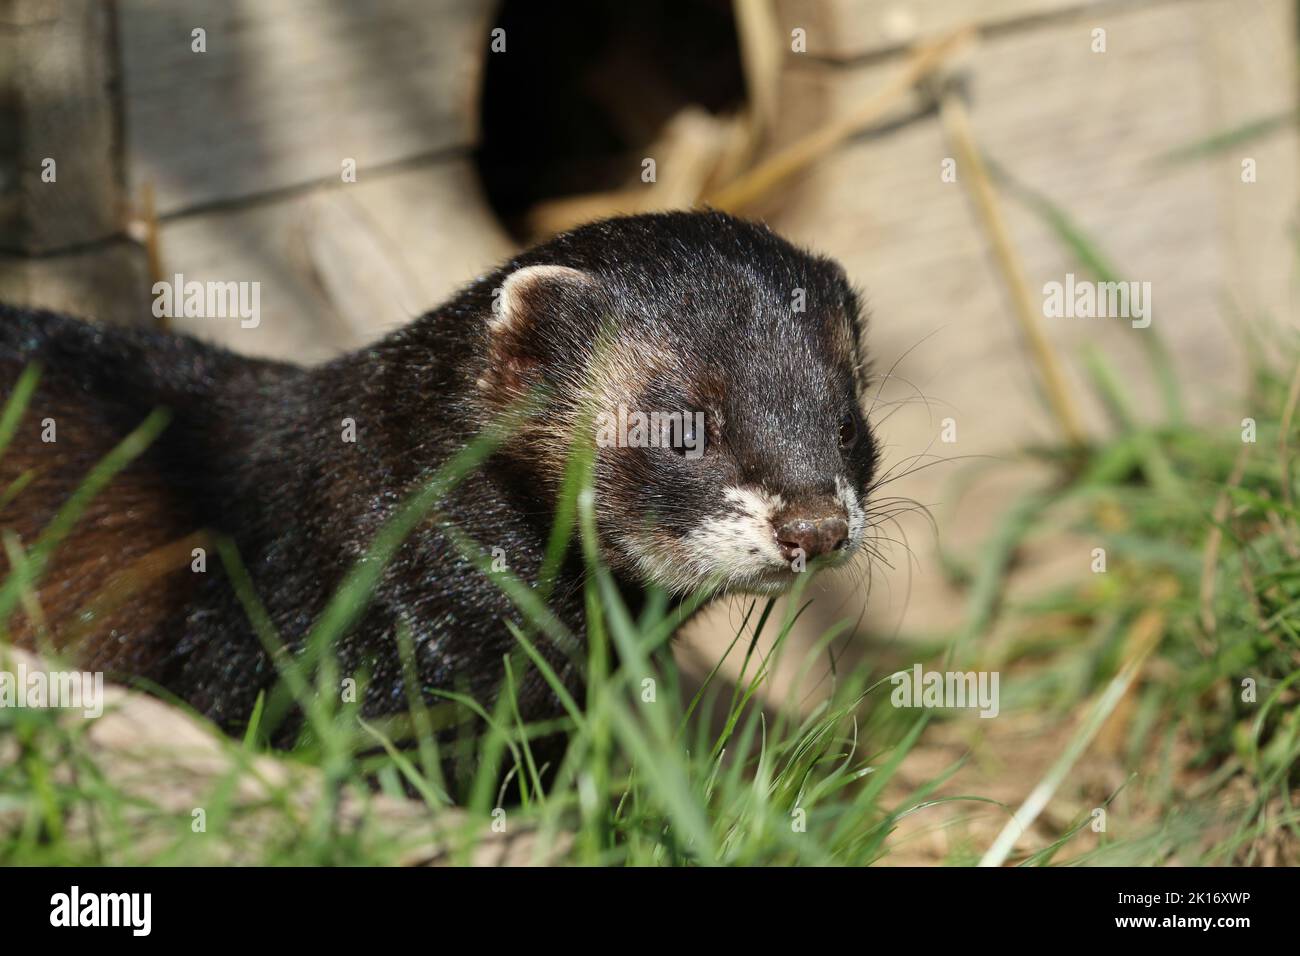 A head shot of a Polecat, Mustela putorius, at a wildlife conservation center. Stock Photo